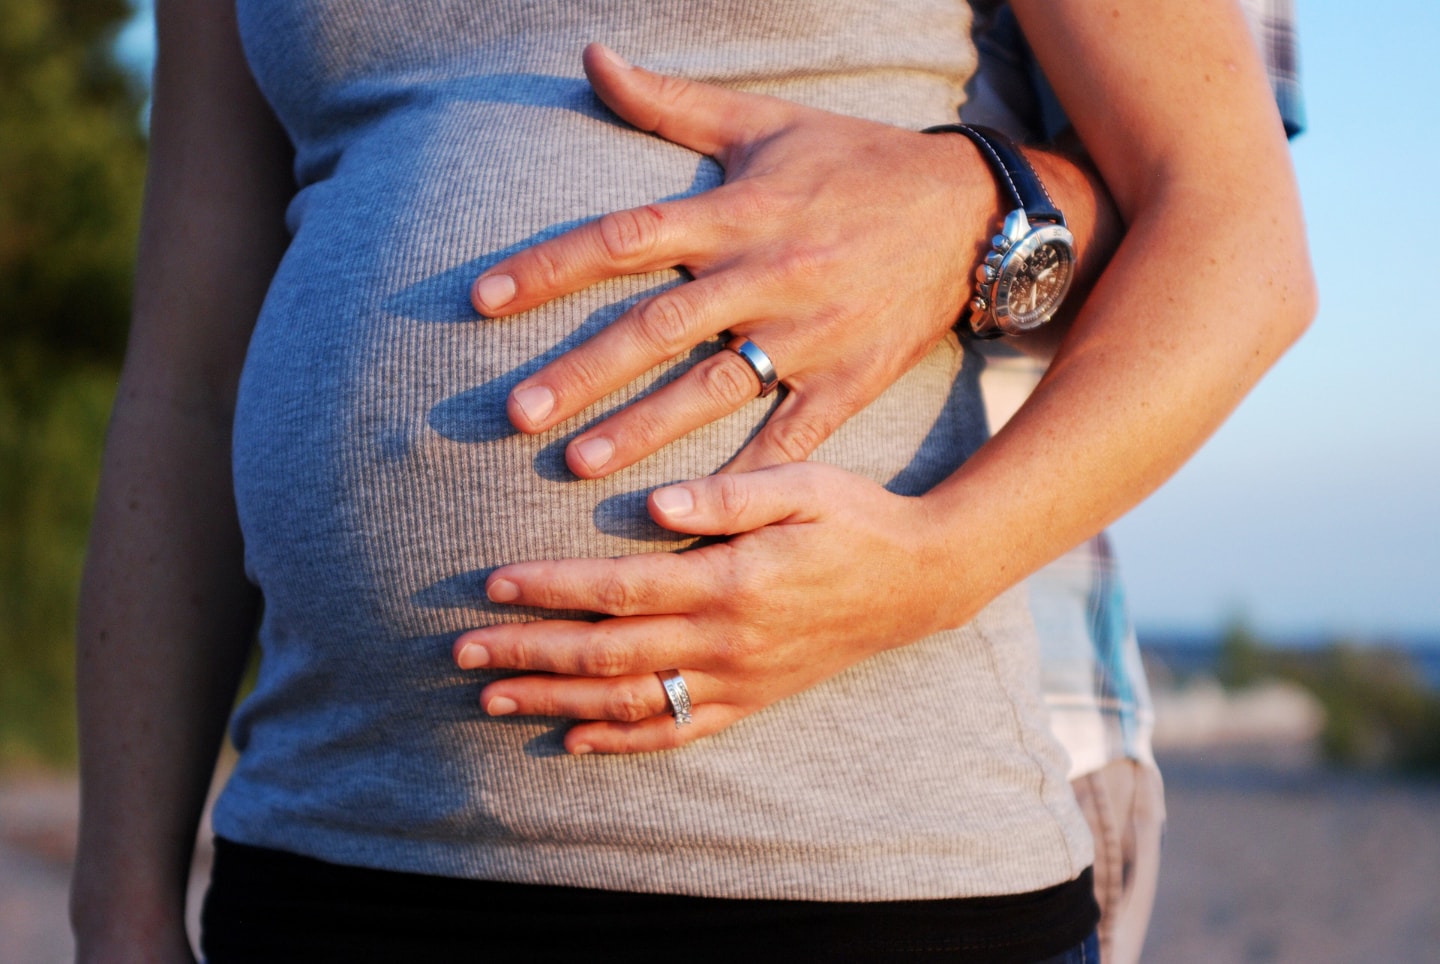 Prenatal attachment: Can this influence future human relationships?